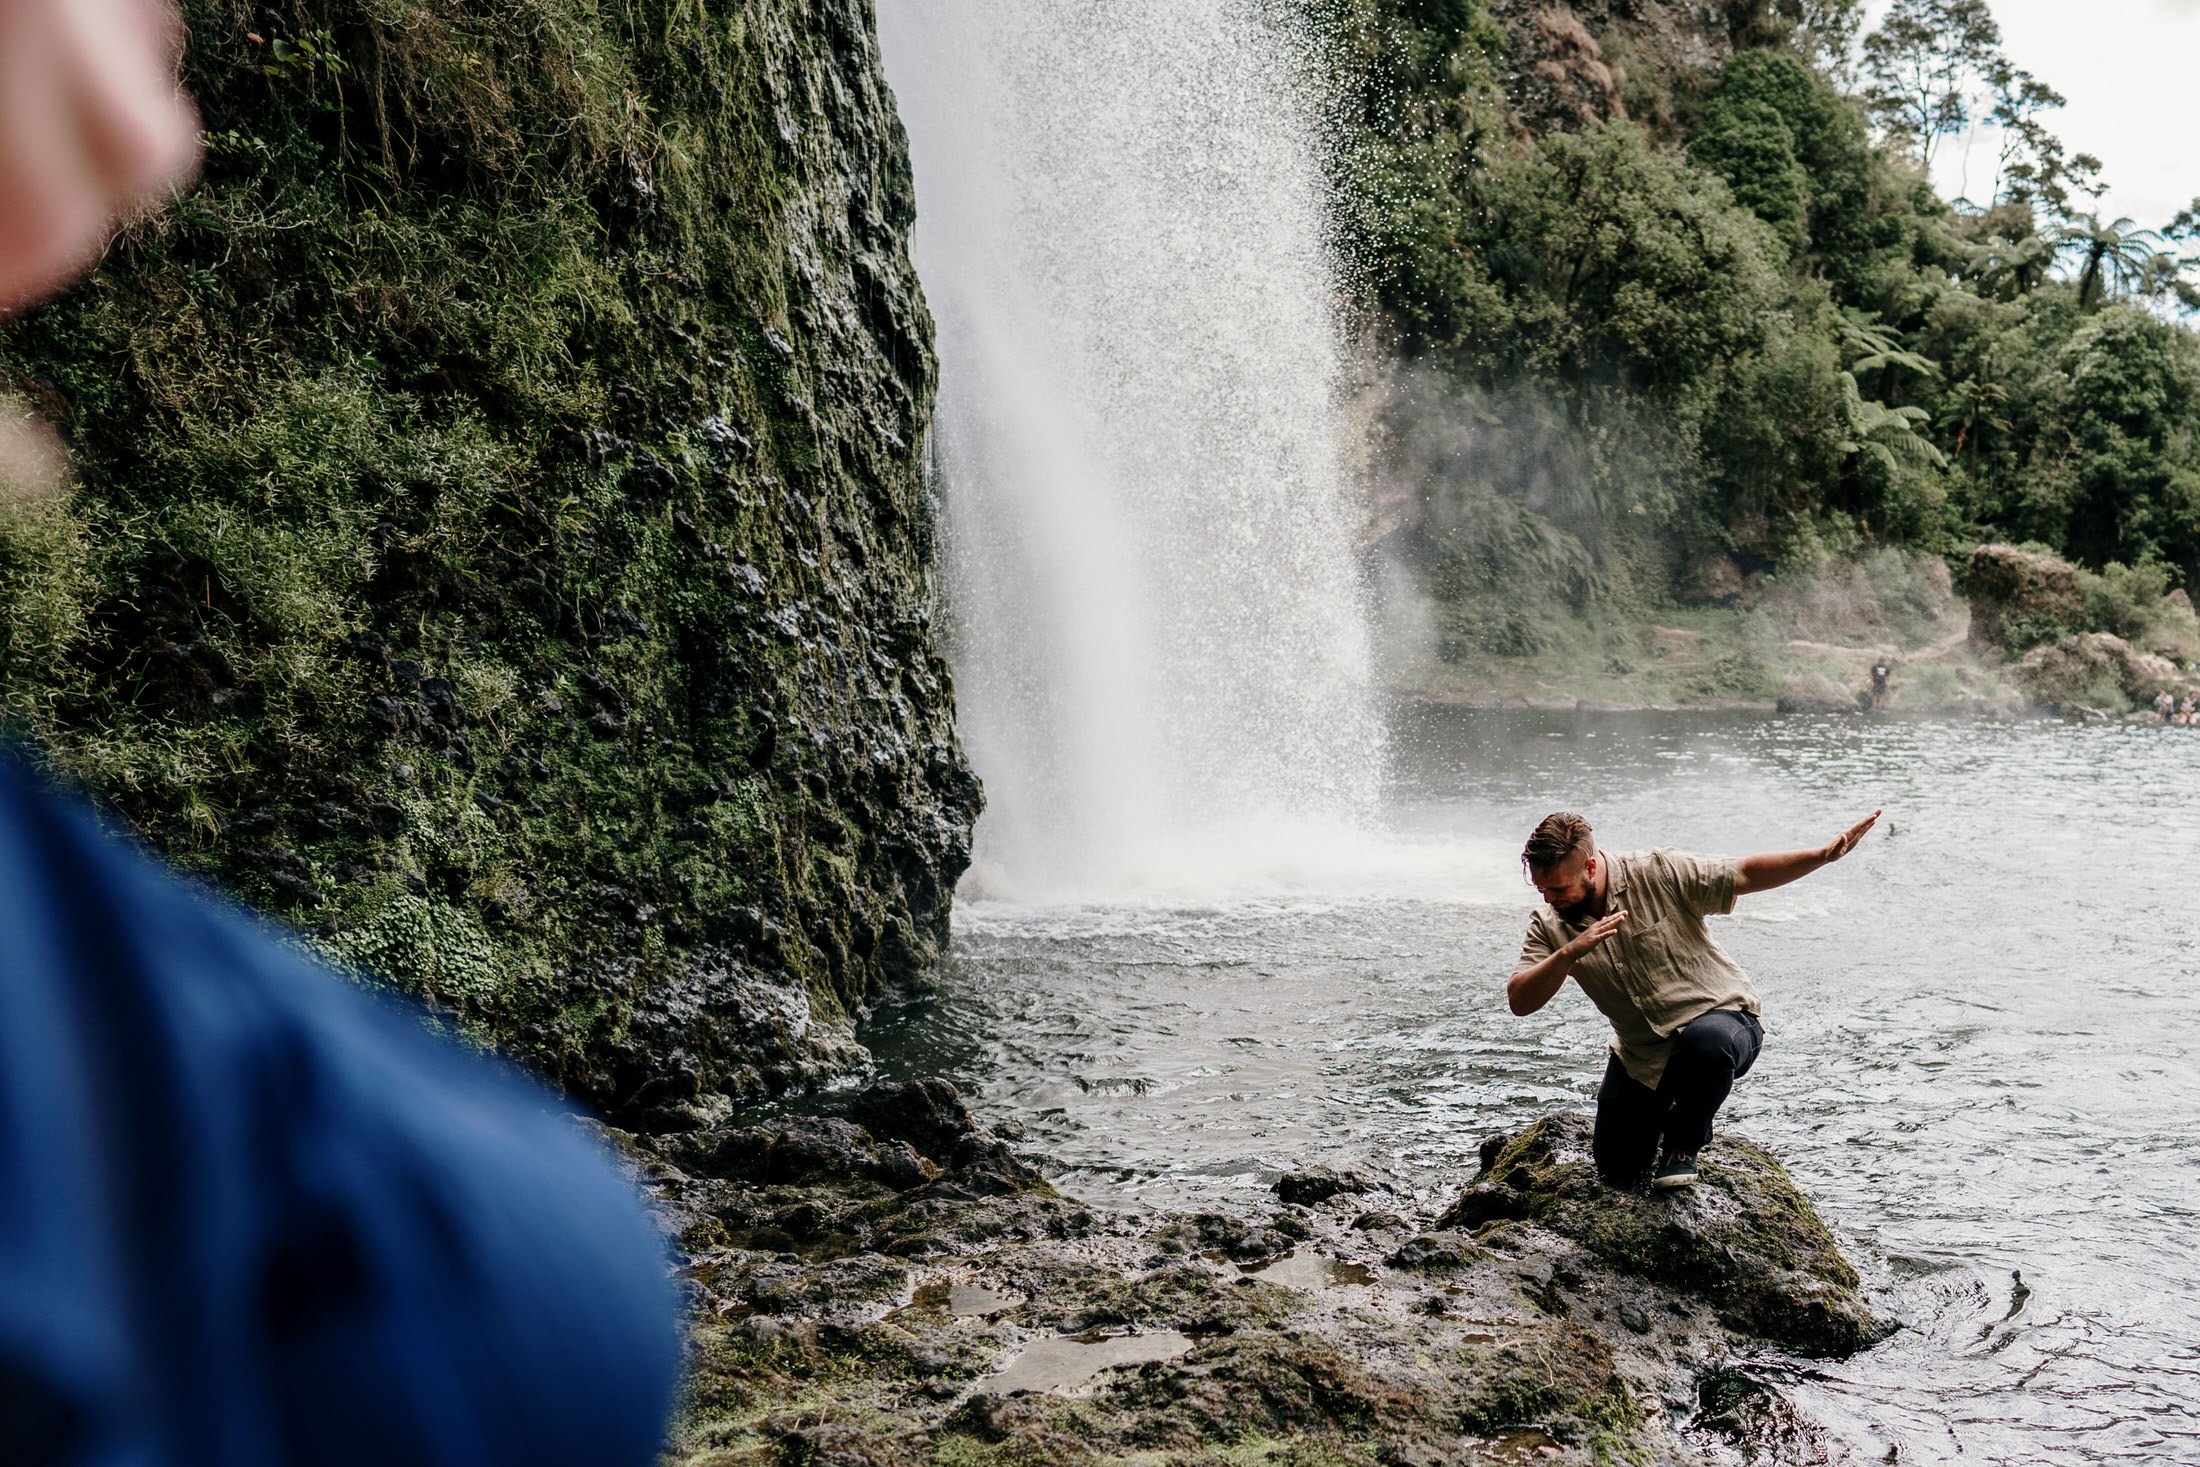 Auckland Engagement Photography | Auckland Wedding Photographer and  Videography | Hunua Falls Engagement Photography | Forest Engagement | Waterfall Shoot